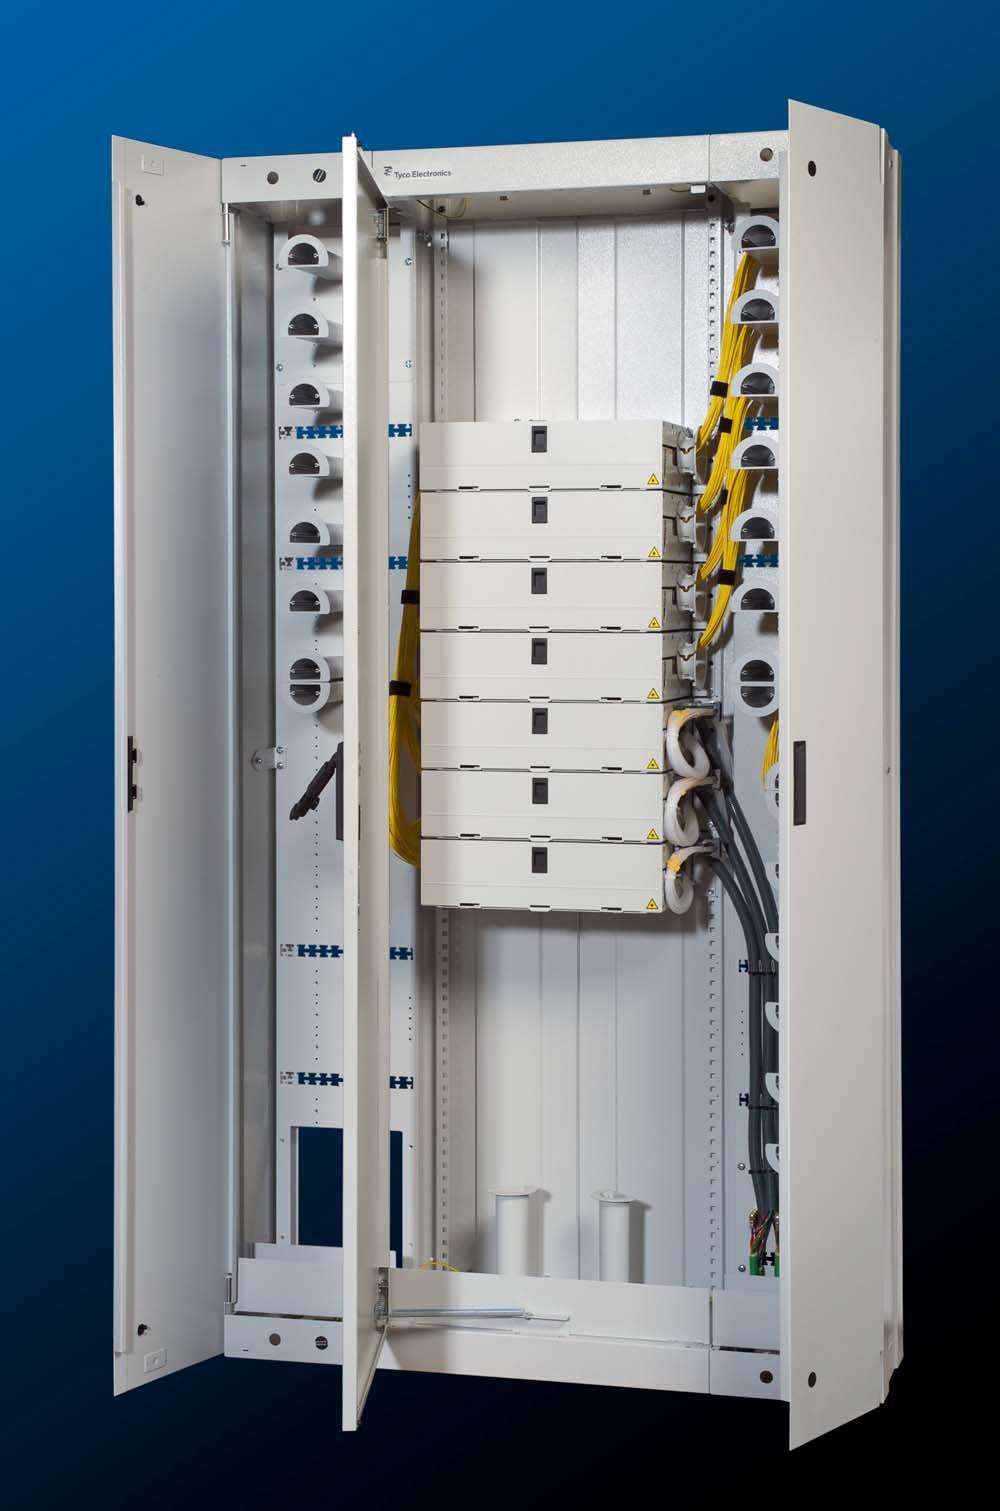 Page 2 of 13 1 Product description The FIST Blue Label Rack, FIST-GR3, is an all-purpose metal rack designed to accommodate FIST shelves. FIST-GR3 complies with metric ETSI specifications.